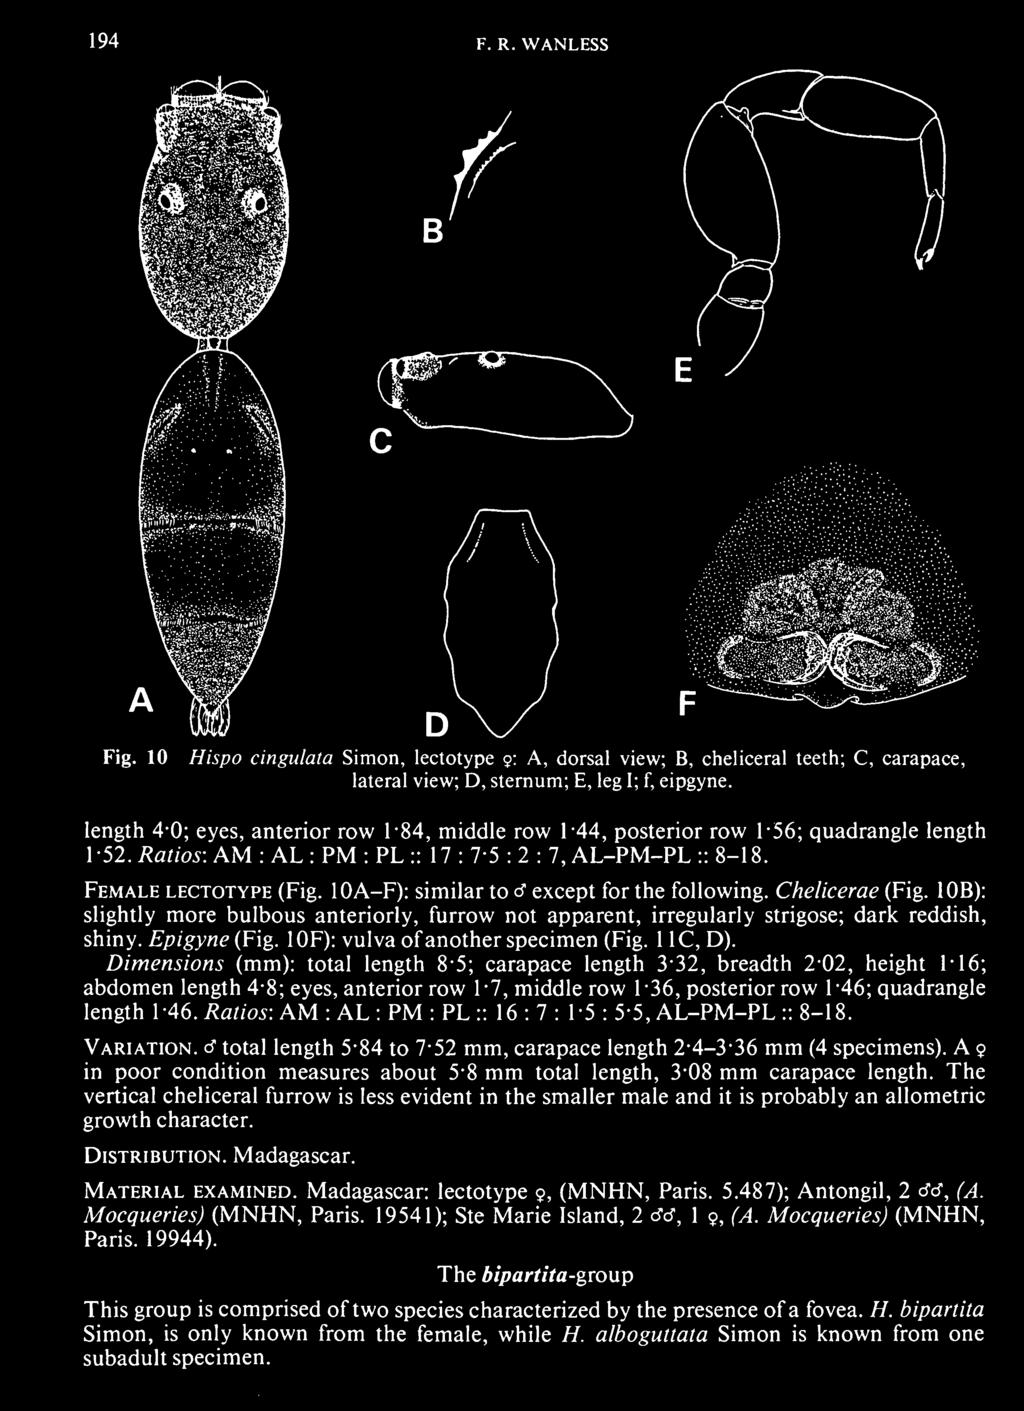 Dimensions (mm): total length 8'5; carapace length 3*32, breadth 2'02, height 1-16; abdomen length 4-8; eyes, anterior row 1-7, middle row 1-36, posterior row 1-46; quadrangle length 1-46.